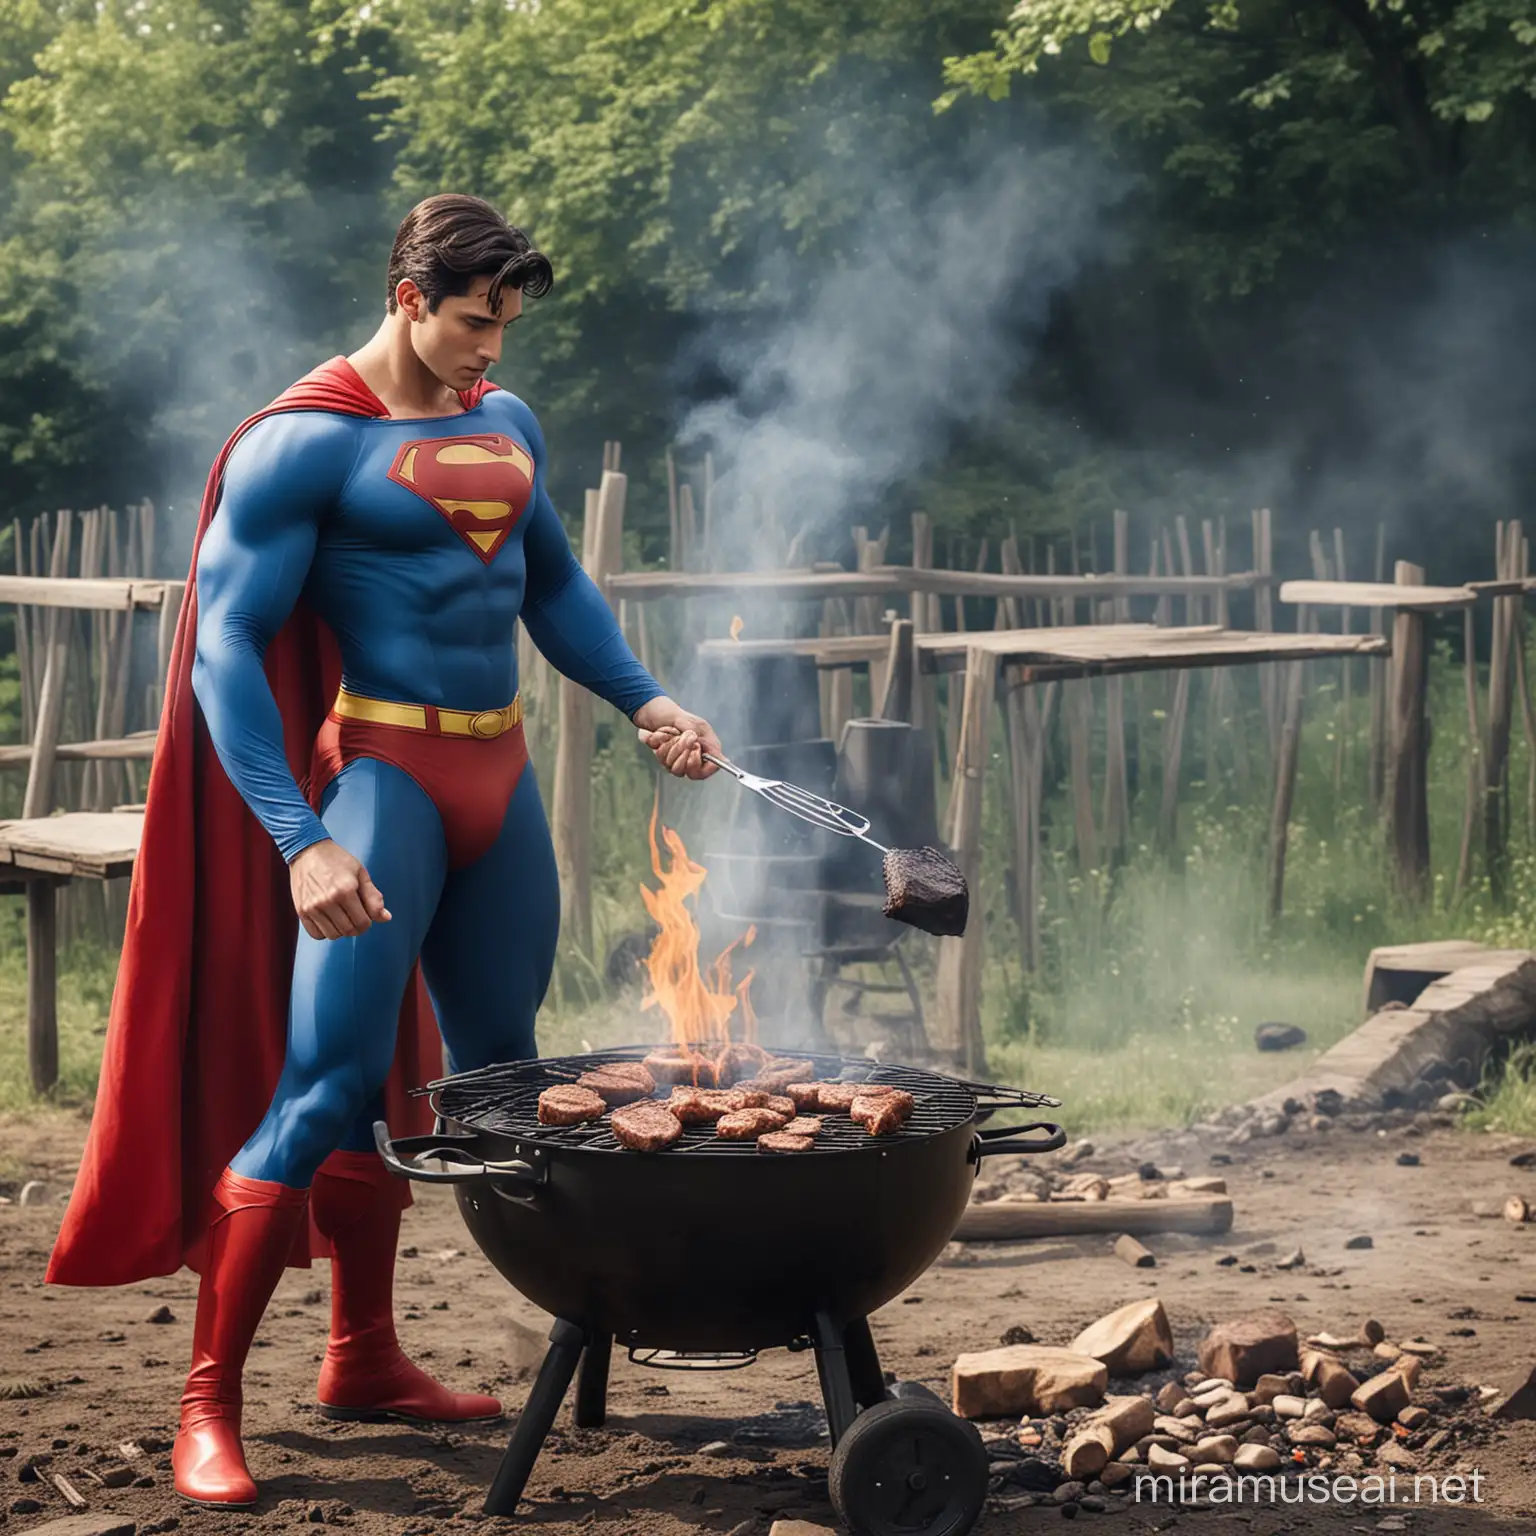 Super Man Grilling BBQ Feast for Friends and Family